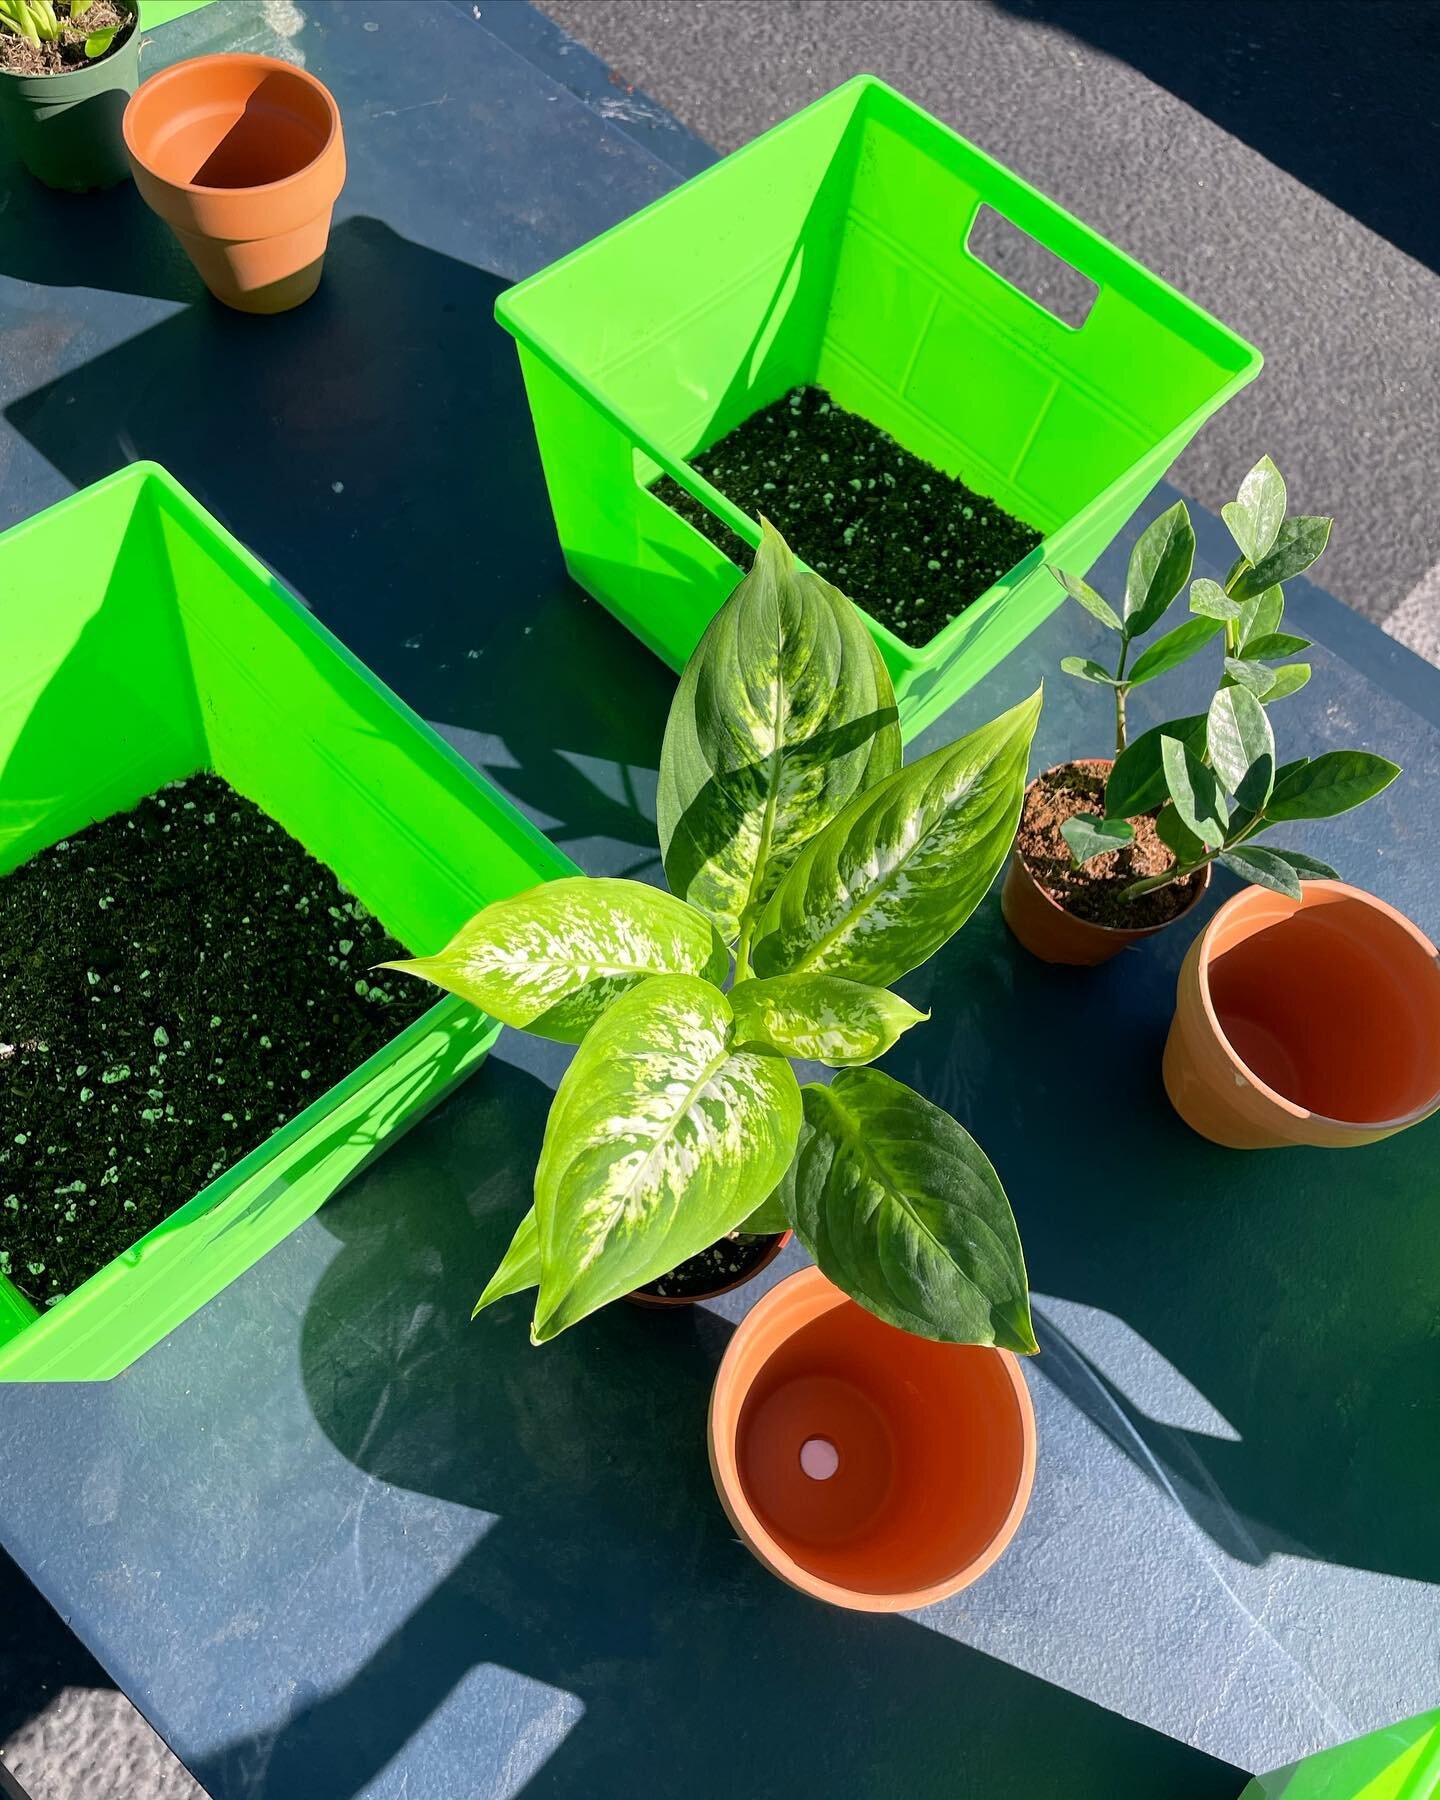 This morning we led a workshop for the 6th grade students @crete_academy as part of their art therapy program. 🌱

We talked to the students about the benefits of plants and how similar we are to them. The similarities are endless and it&rsquo;s supe